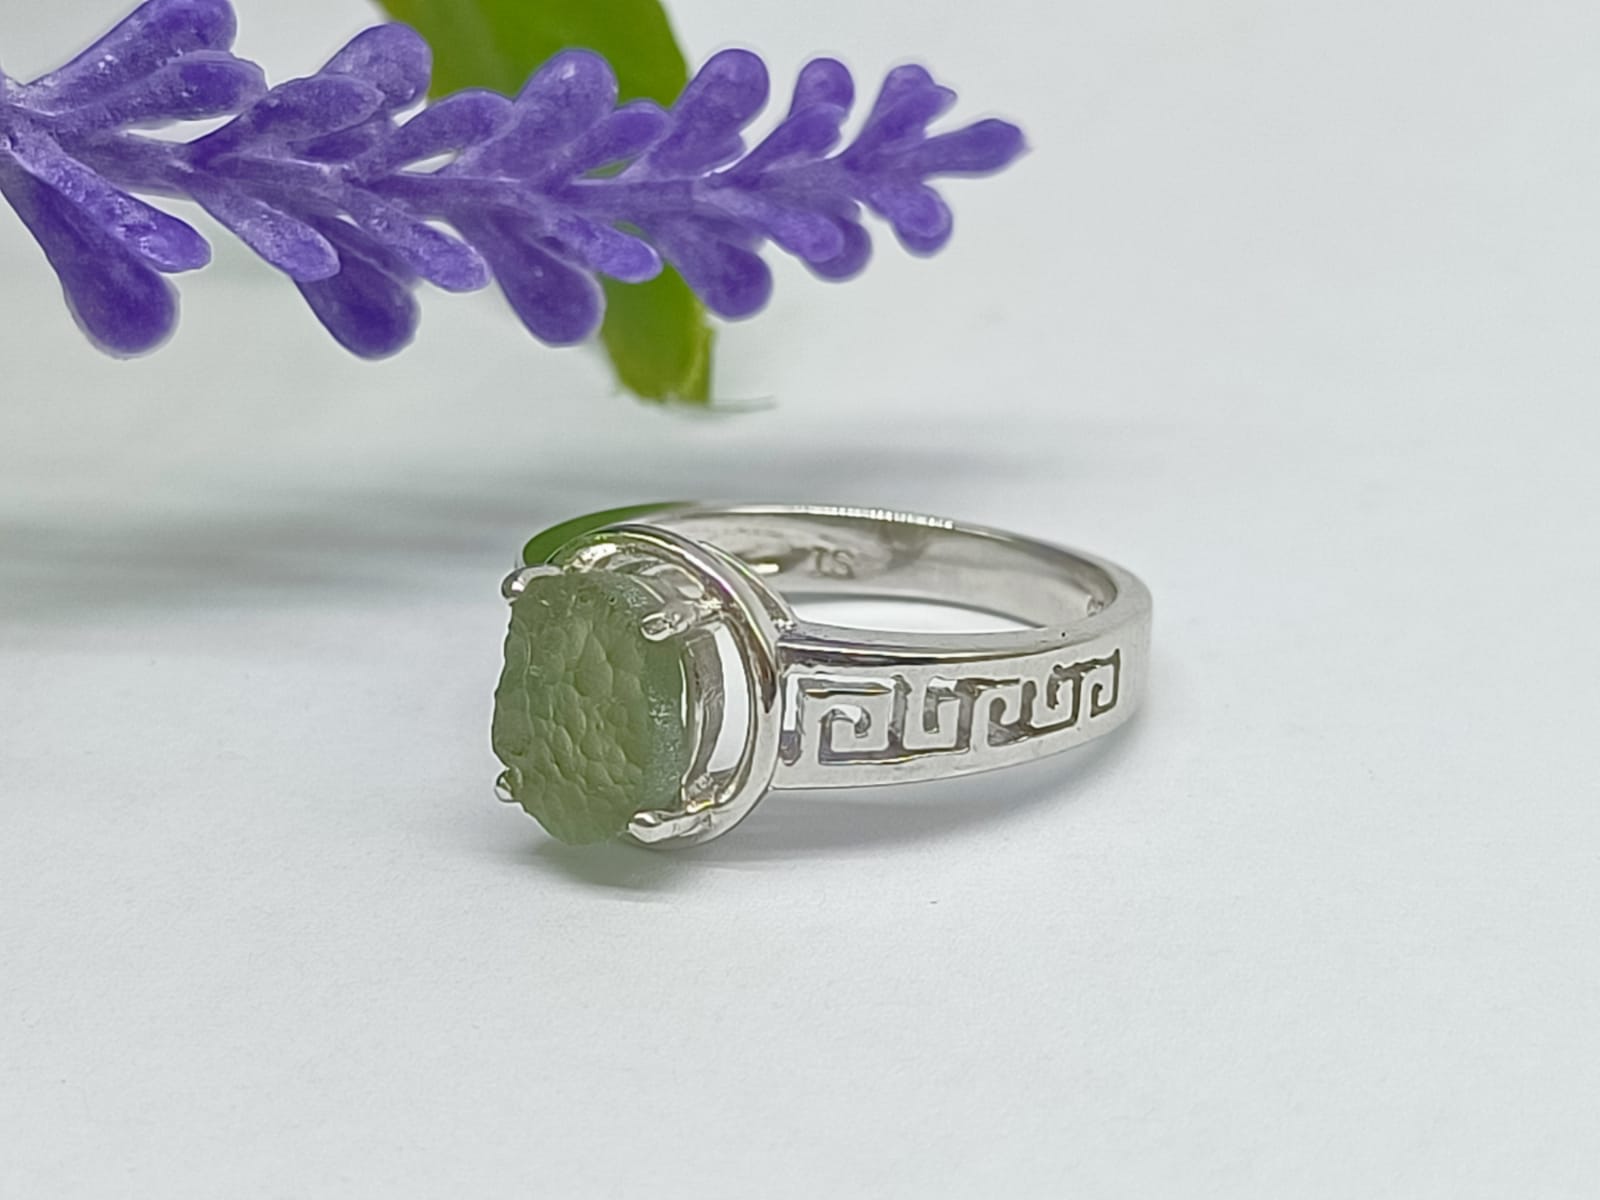 Authentic Moldavite 925 Silver Ring Size 7 USA or N1/2 AUS Crystal Wellness